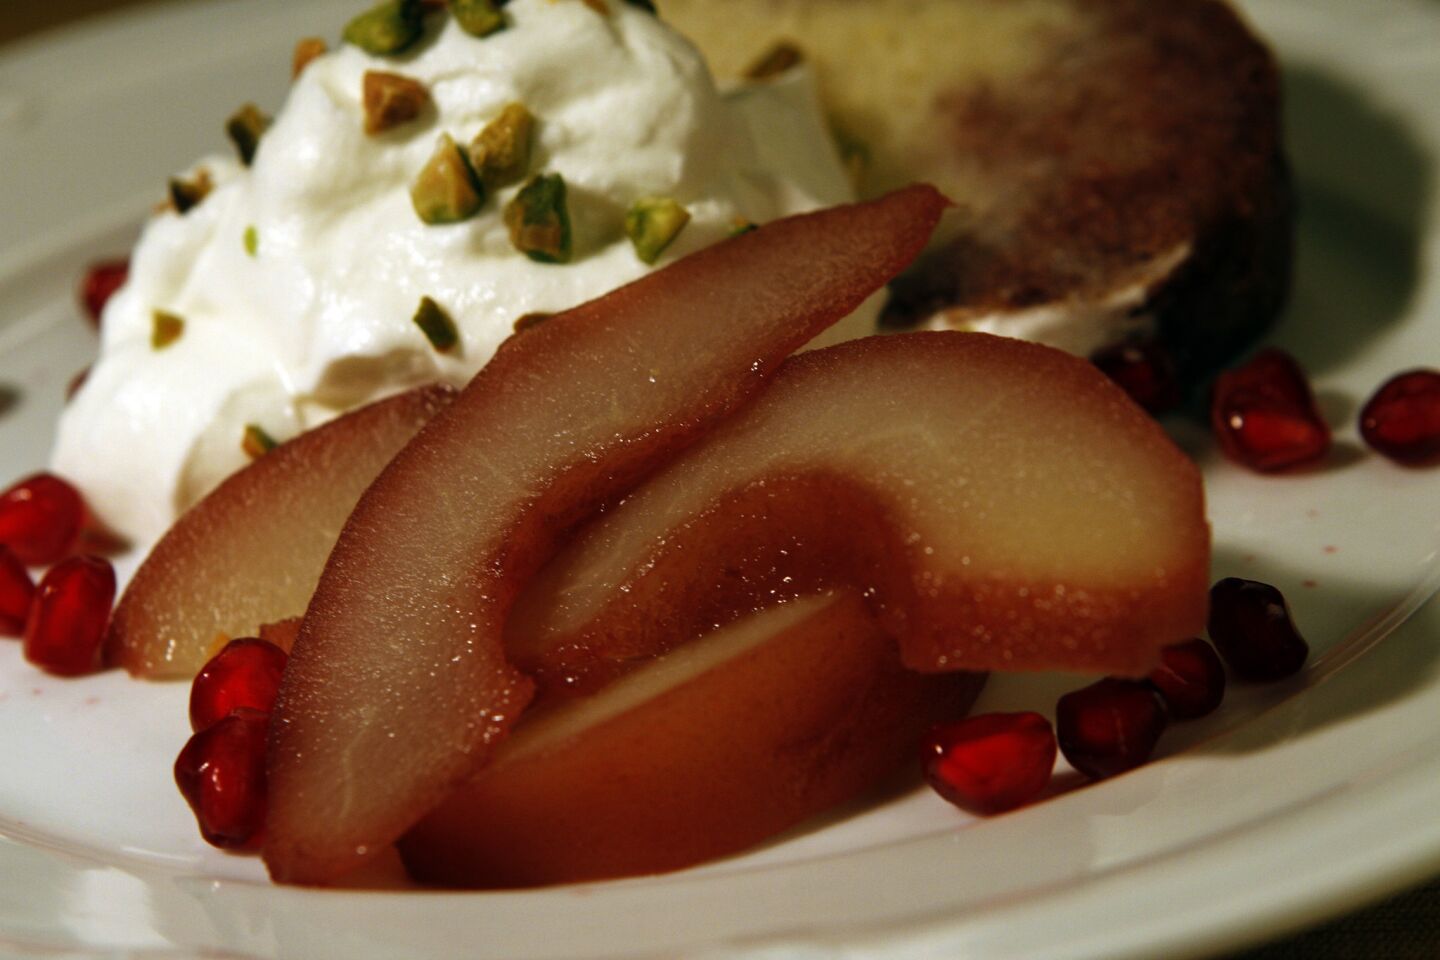 Pomegranate-poached pears